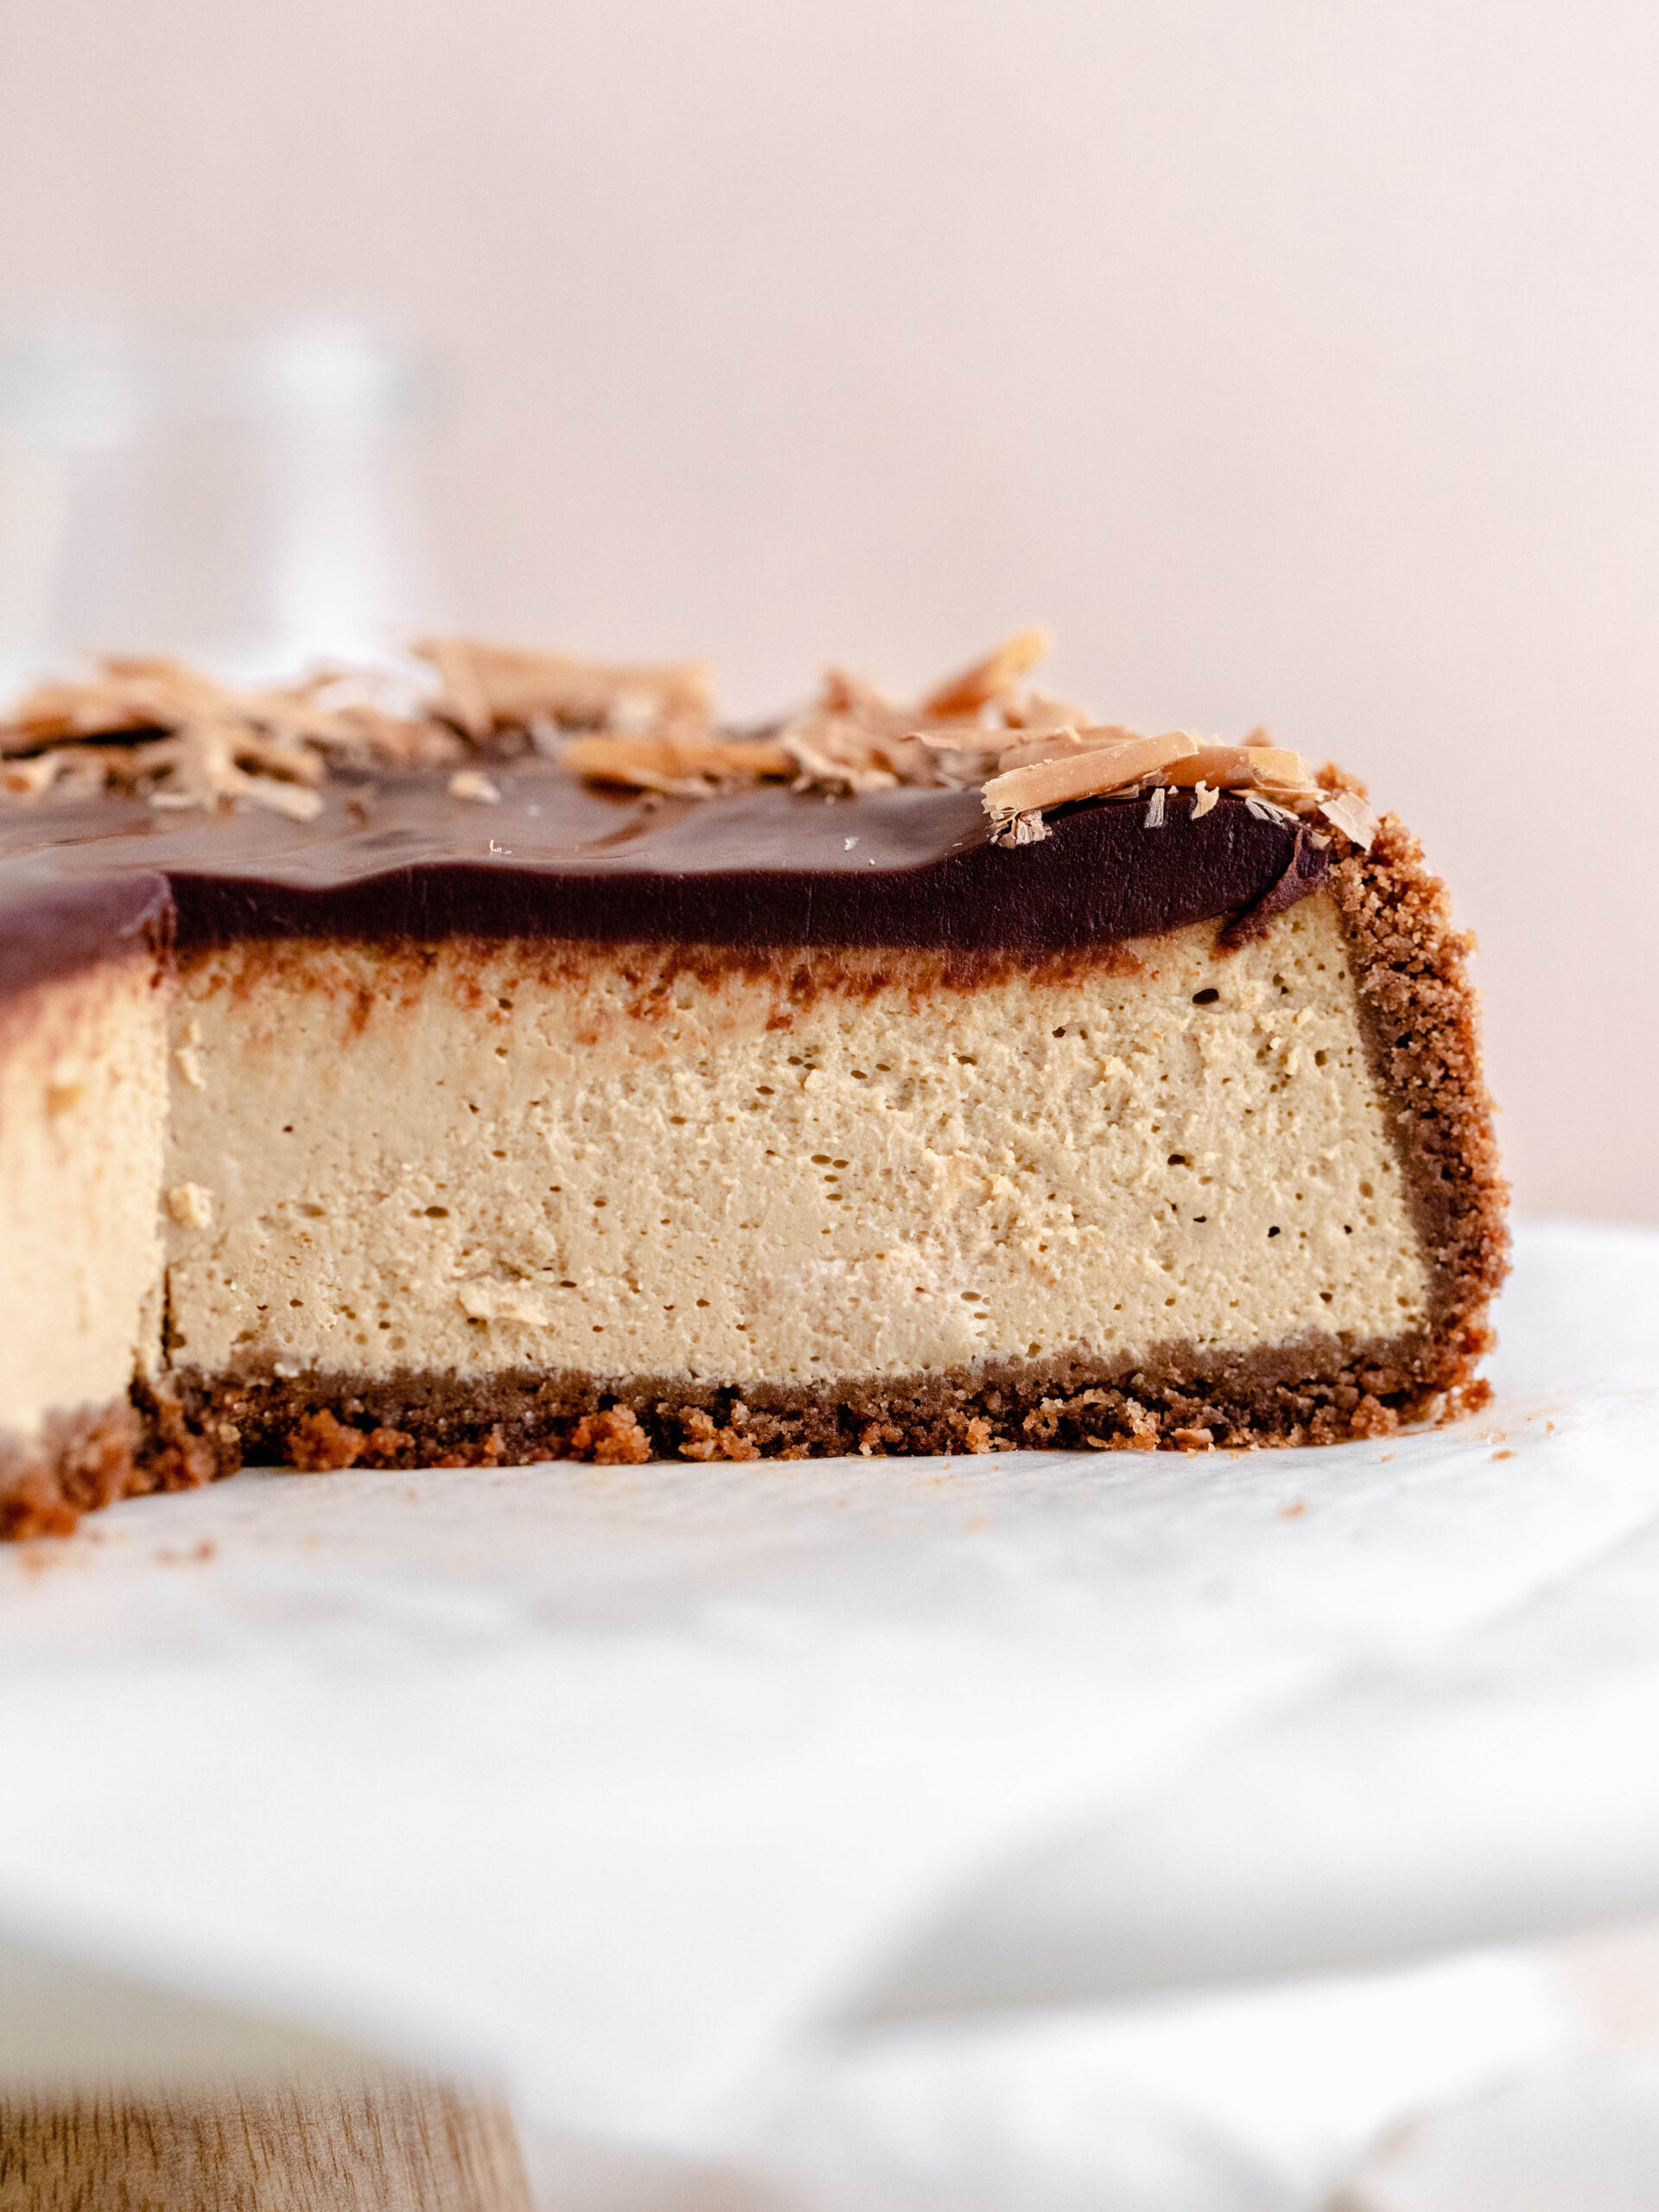 Showing the inside of the Espresso cheesecake.